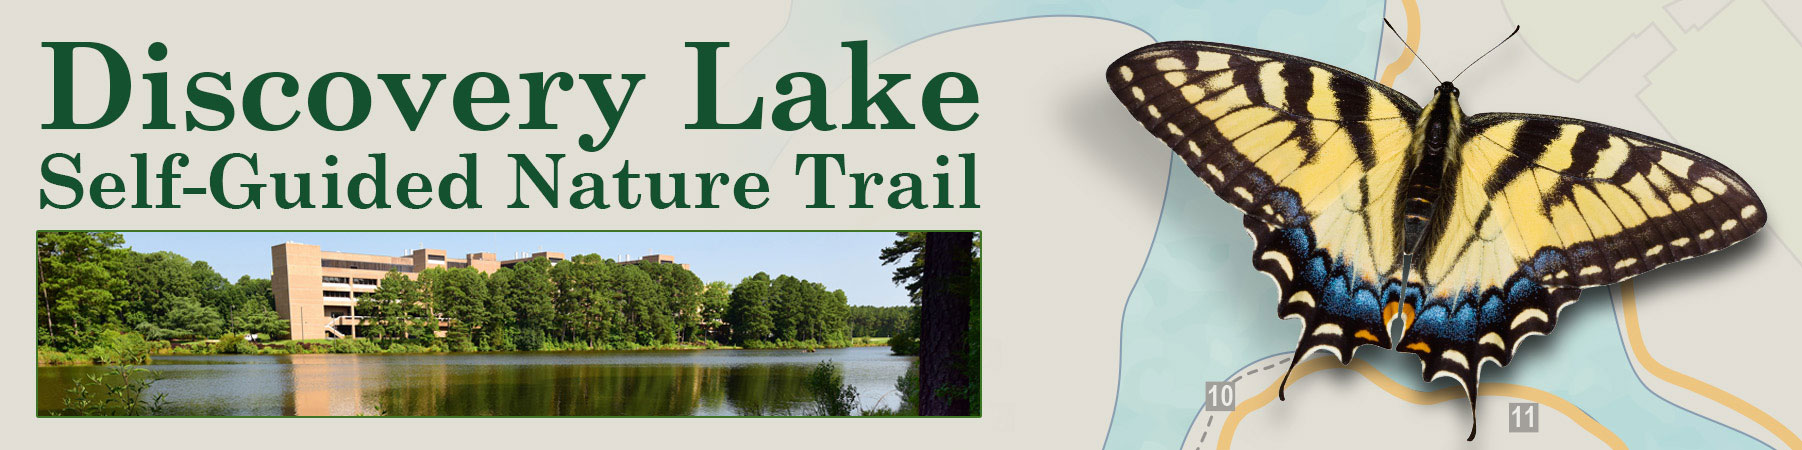 Discovery Lake Self-Guided Nature Trail